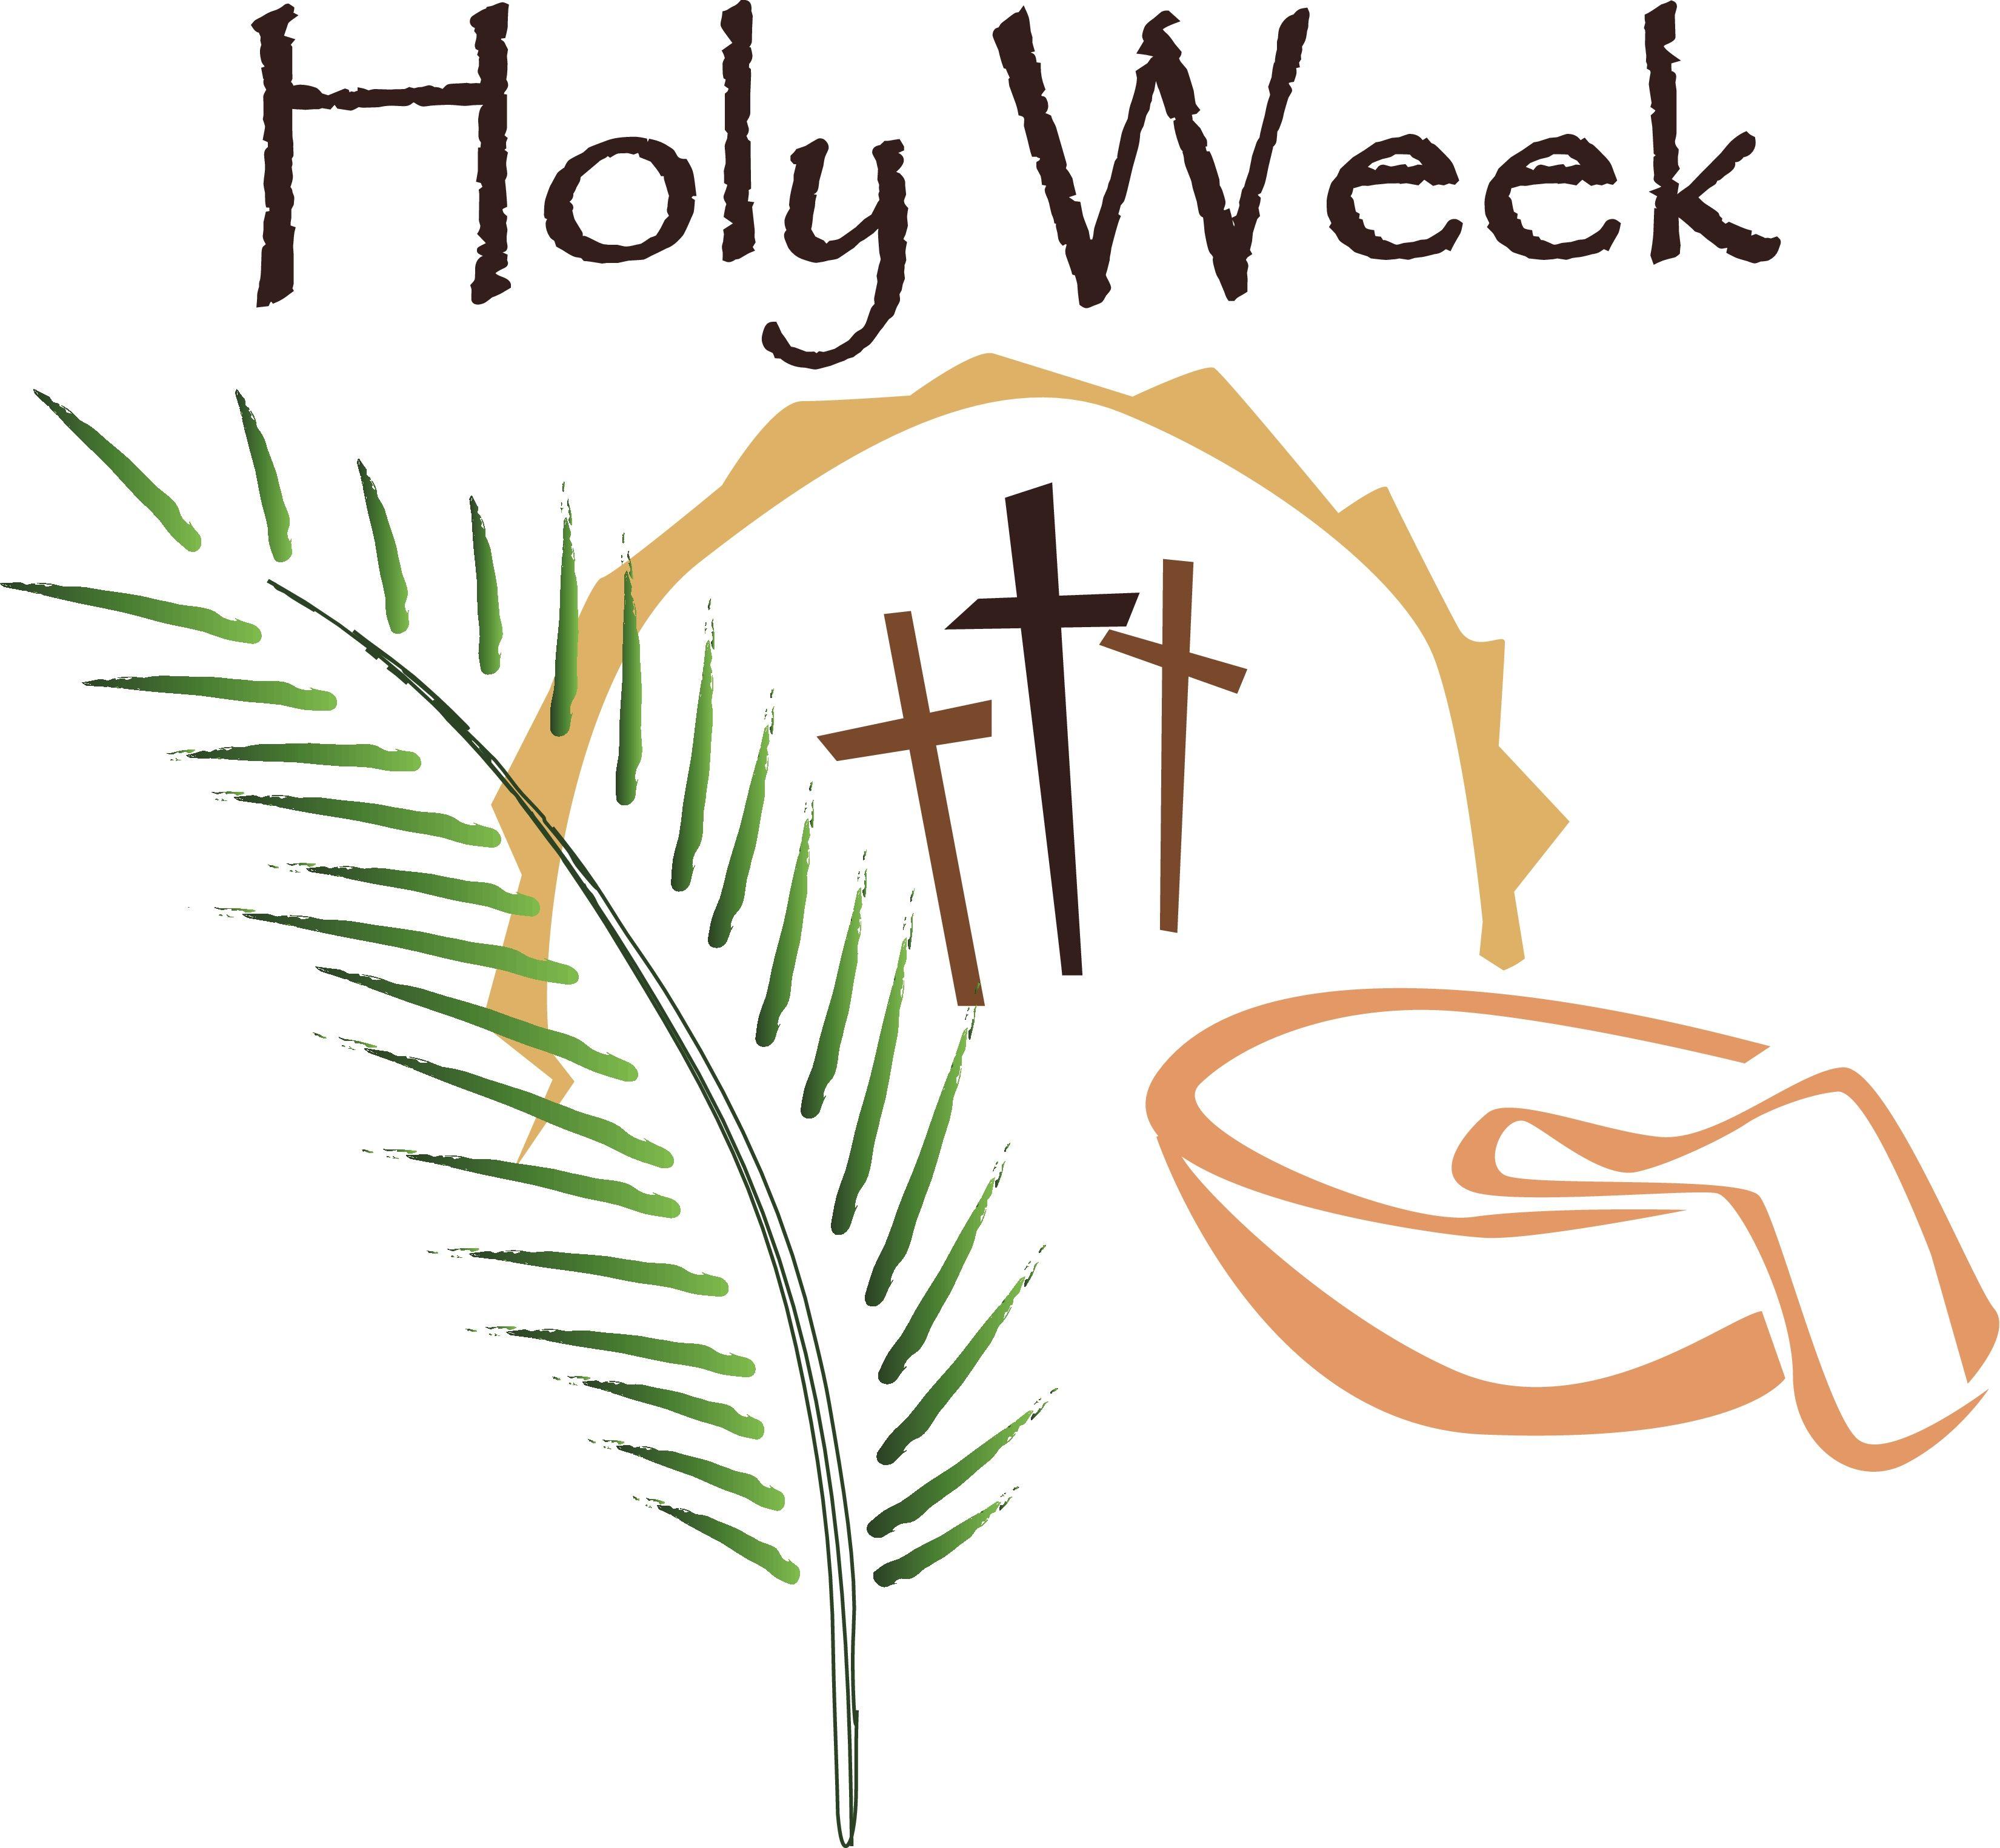 Holy Week HD Wallpaper and Image Download Free